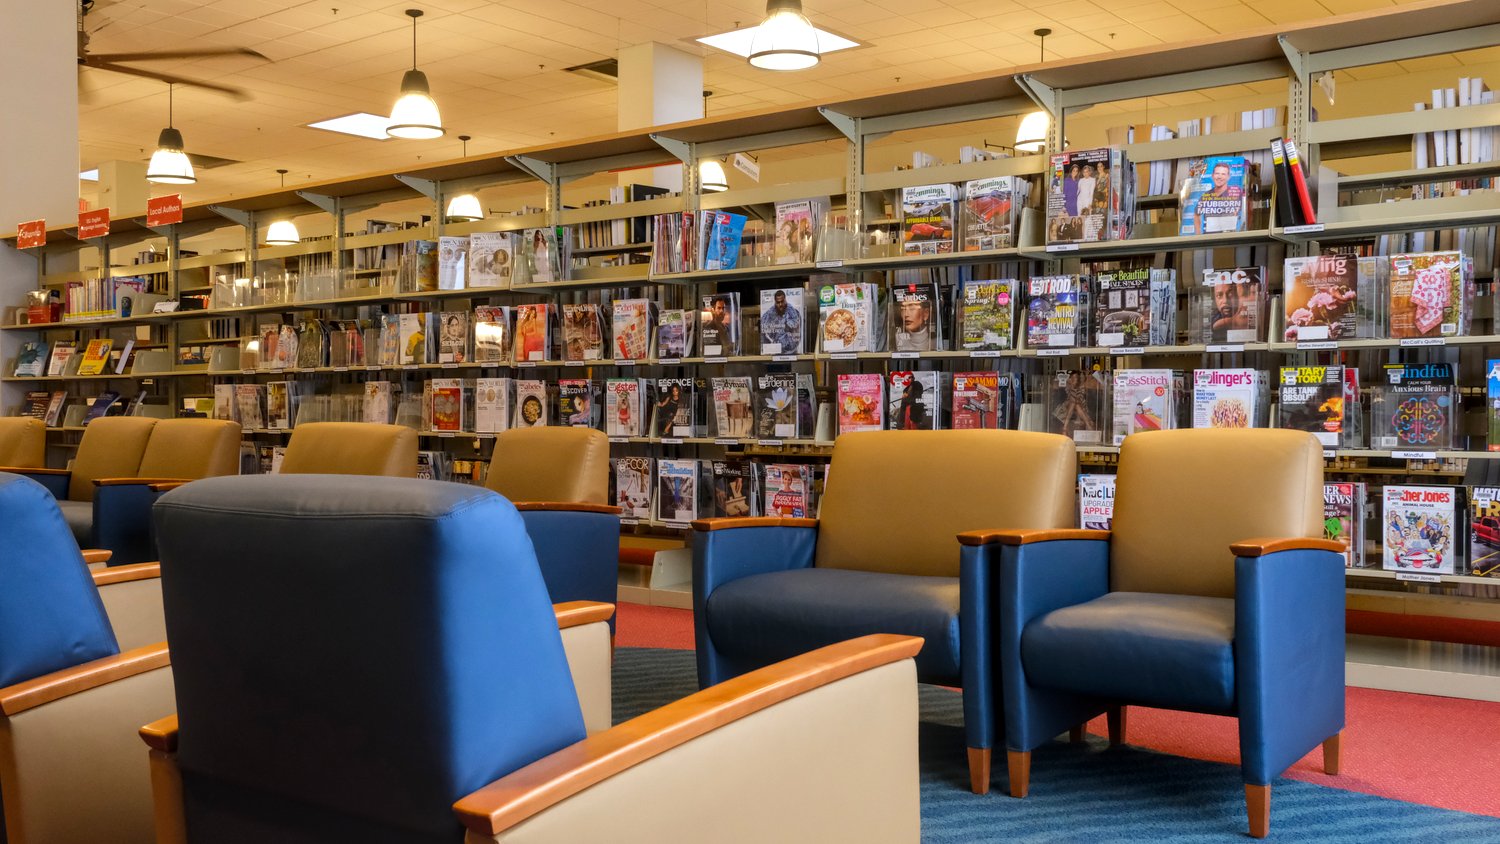 Rows of chairs line the magazine and periodicals area.